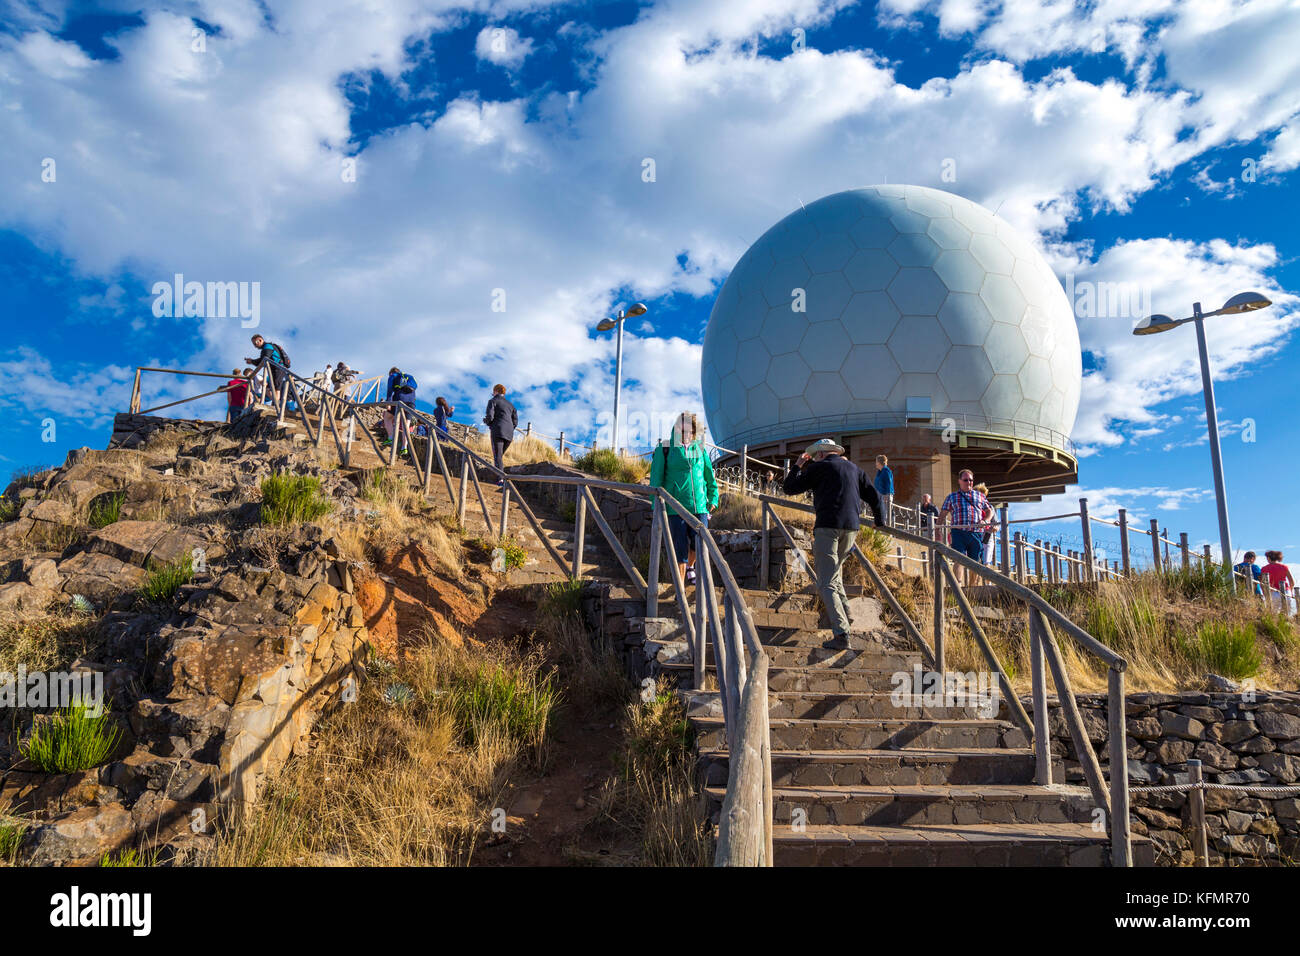 Air Defence Radar Station and people at the summit of Pico do Arieiro, Madeira, Portugal Stock Photo